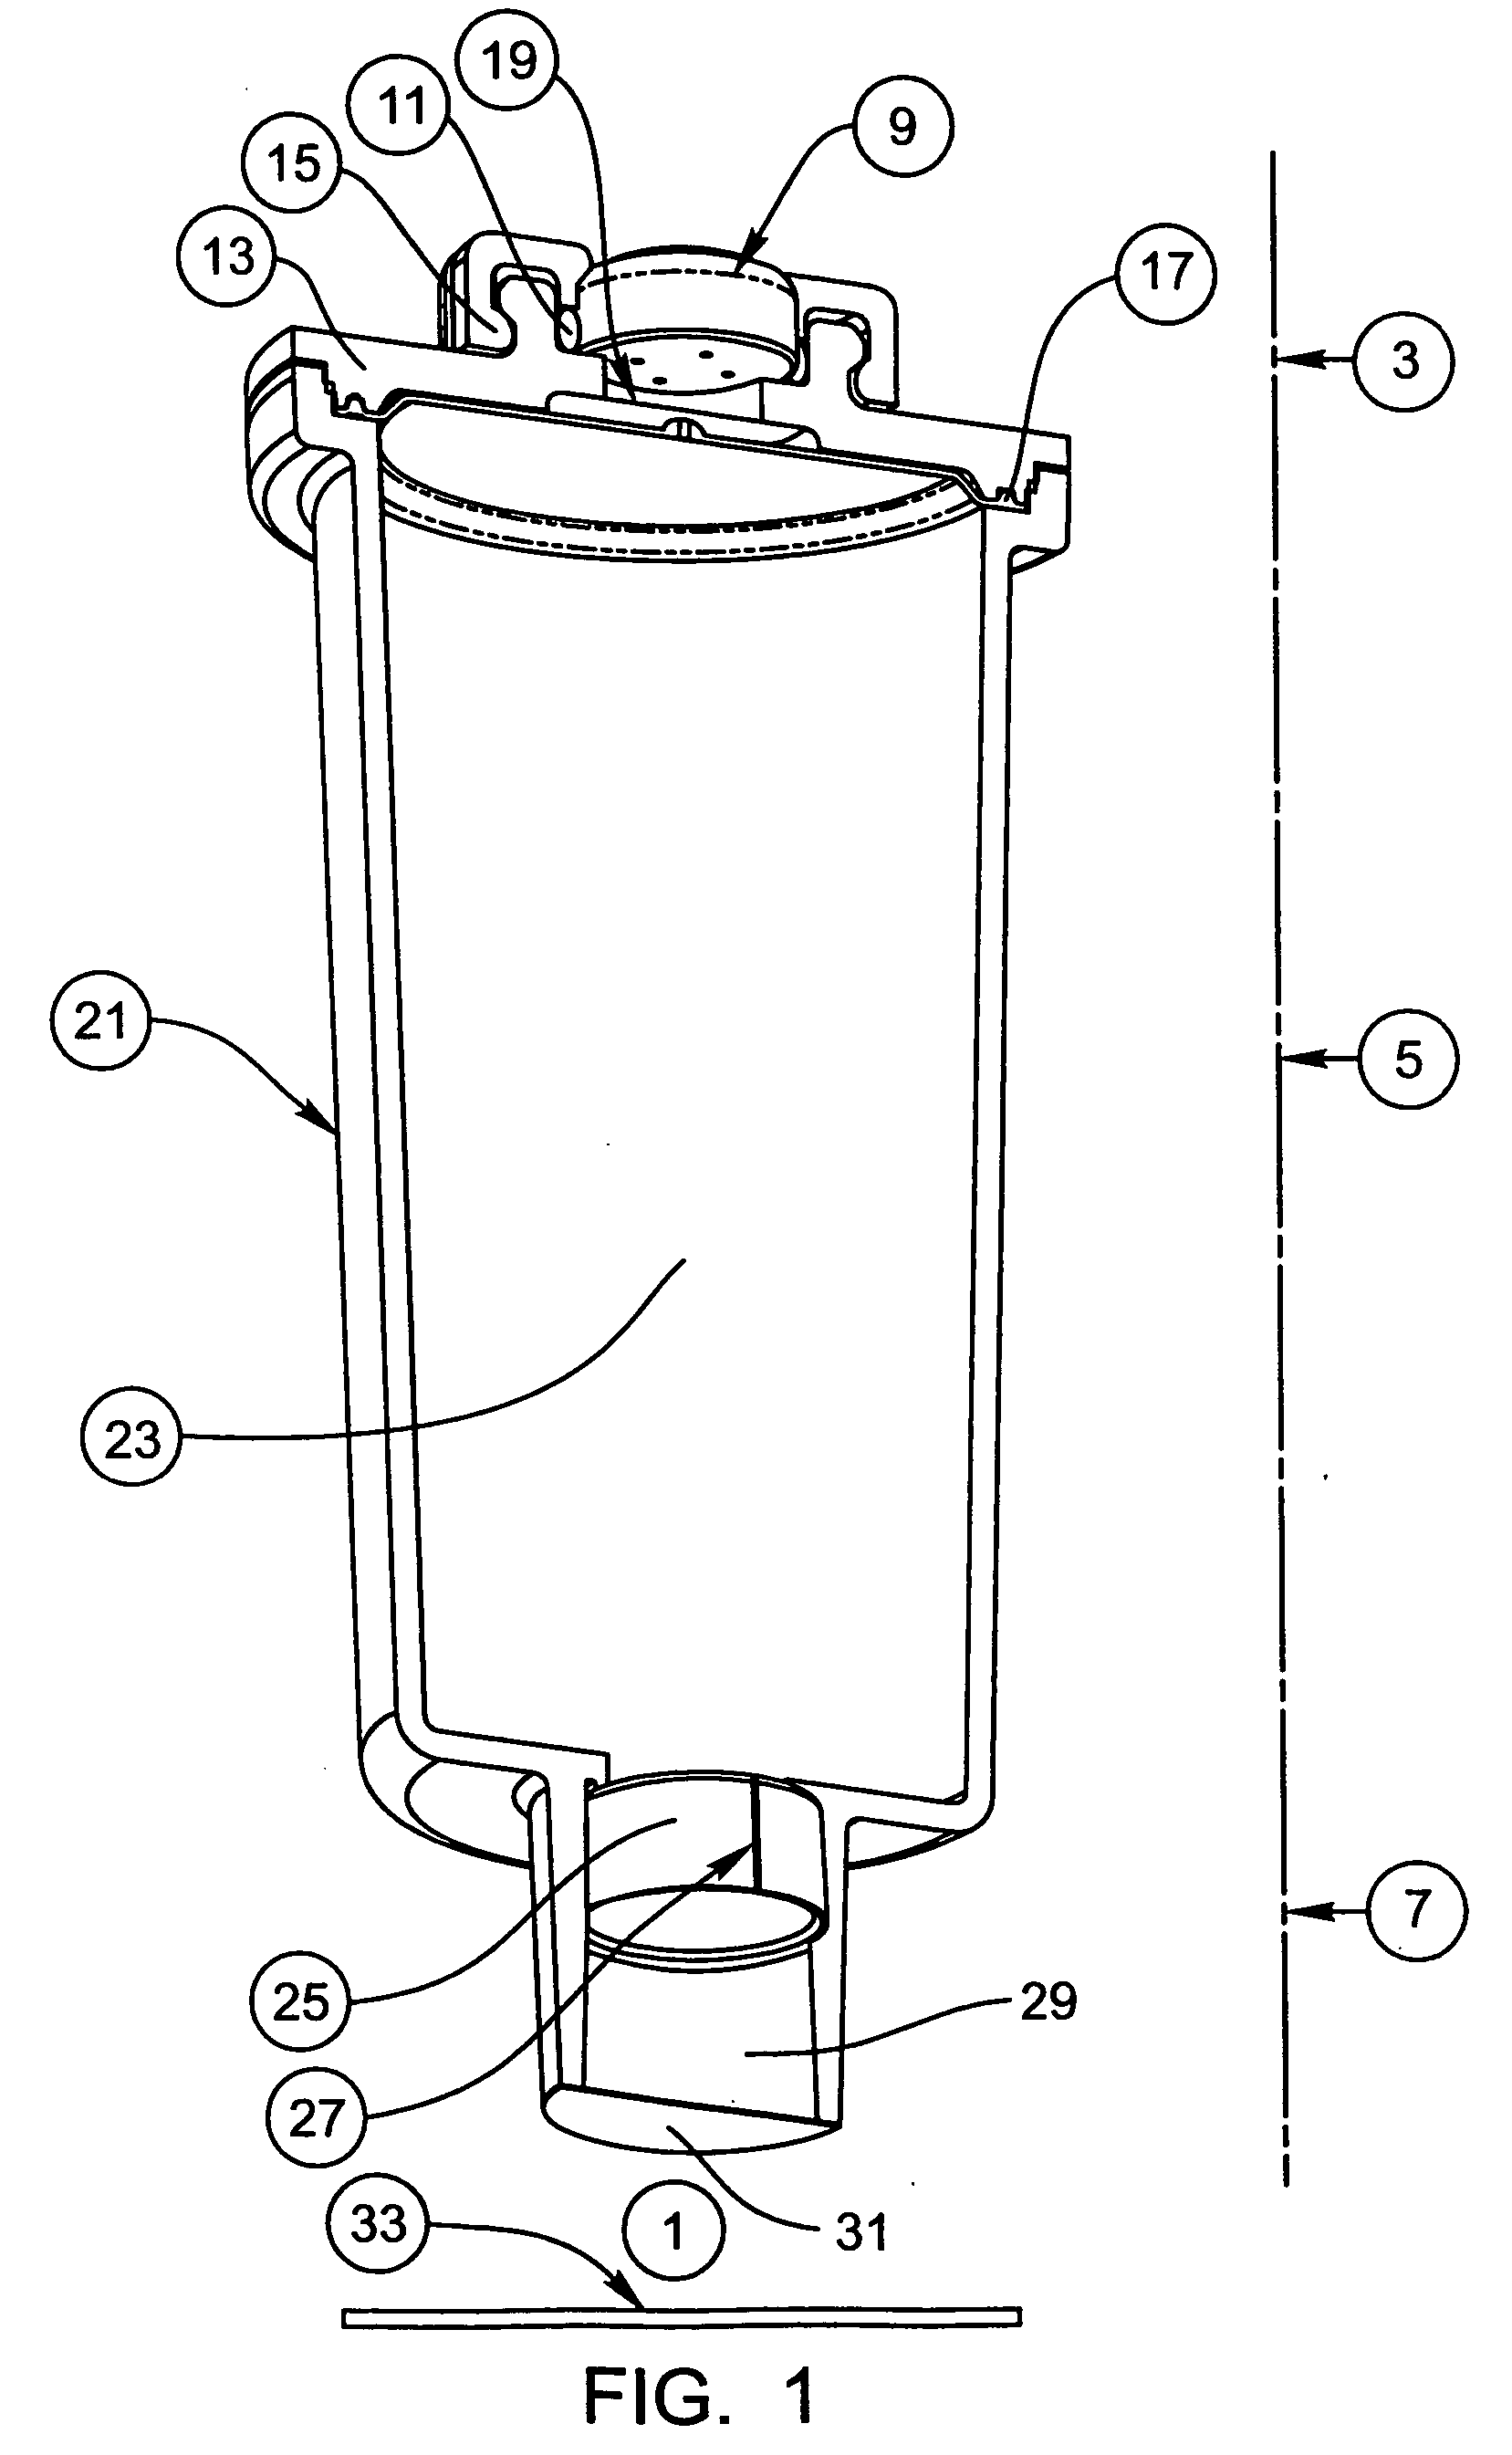 Device employing gas generating cell for facilitating controlled release of fluid into ambient environment